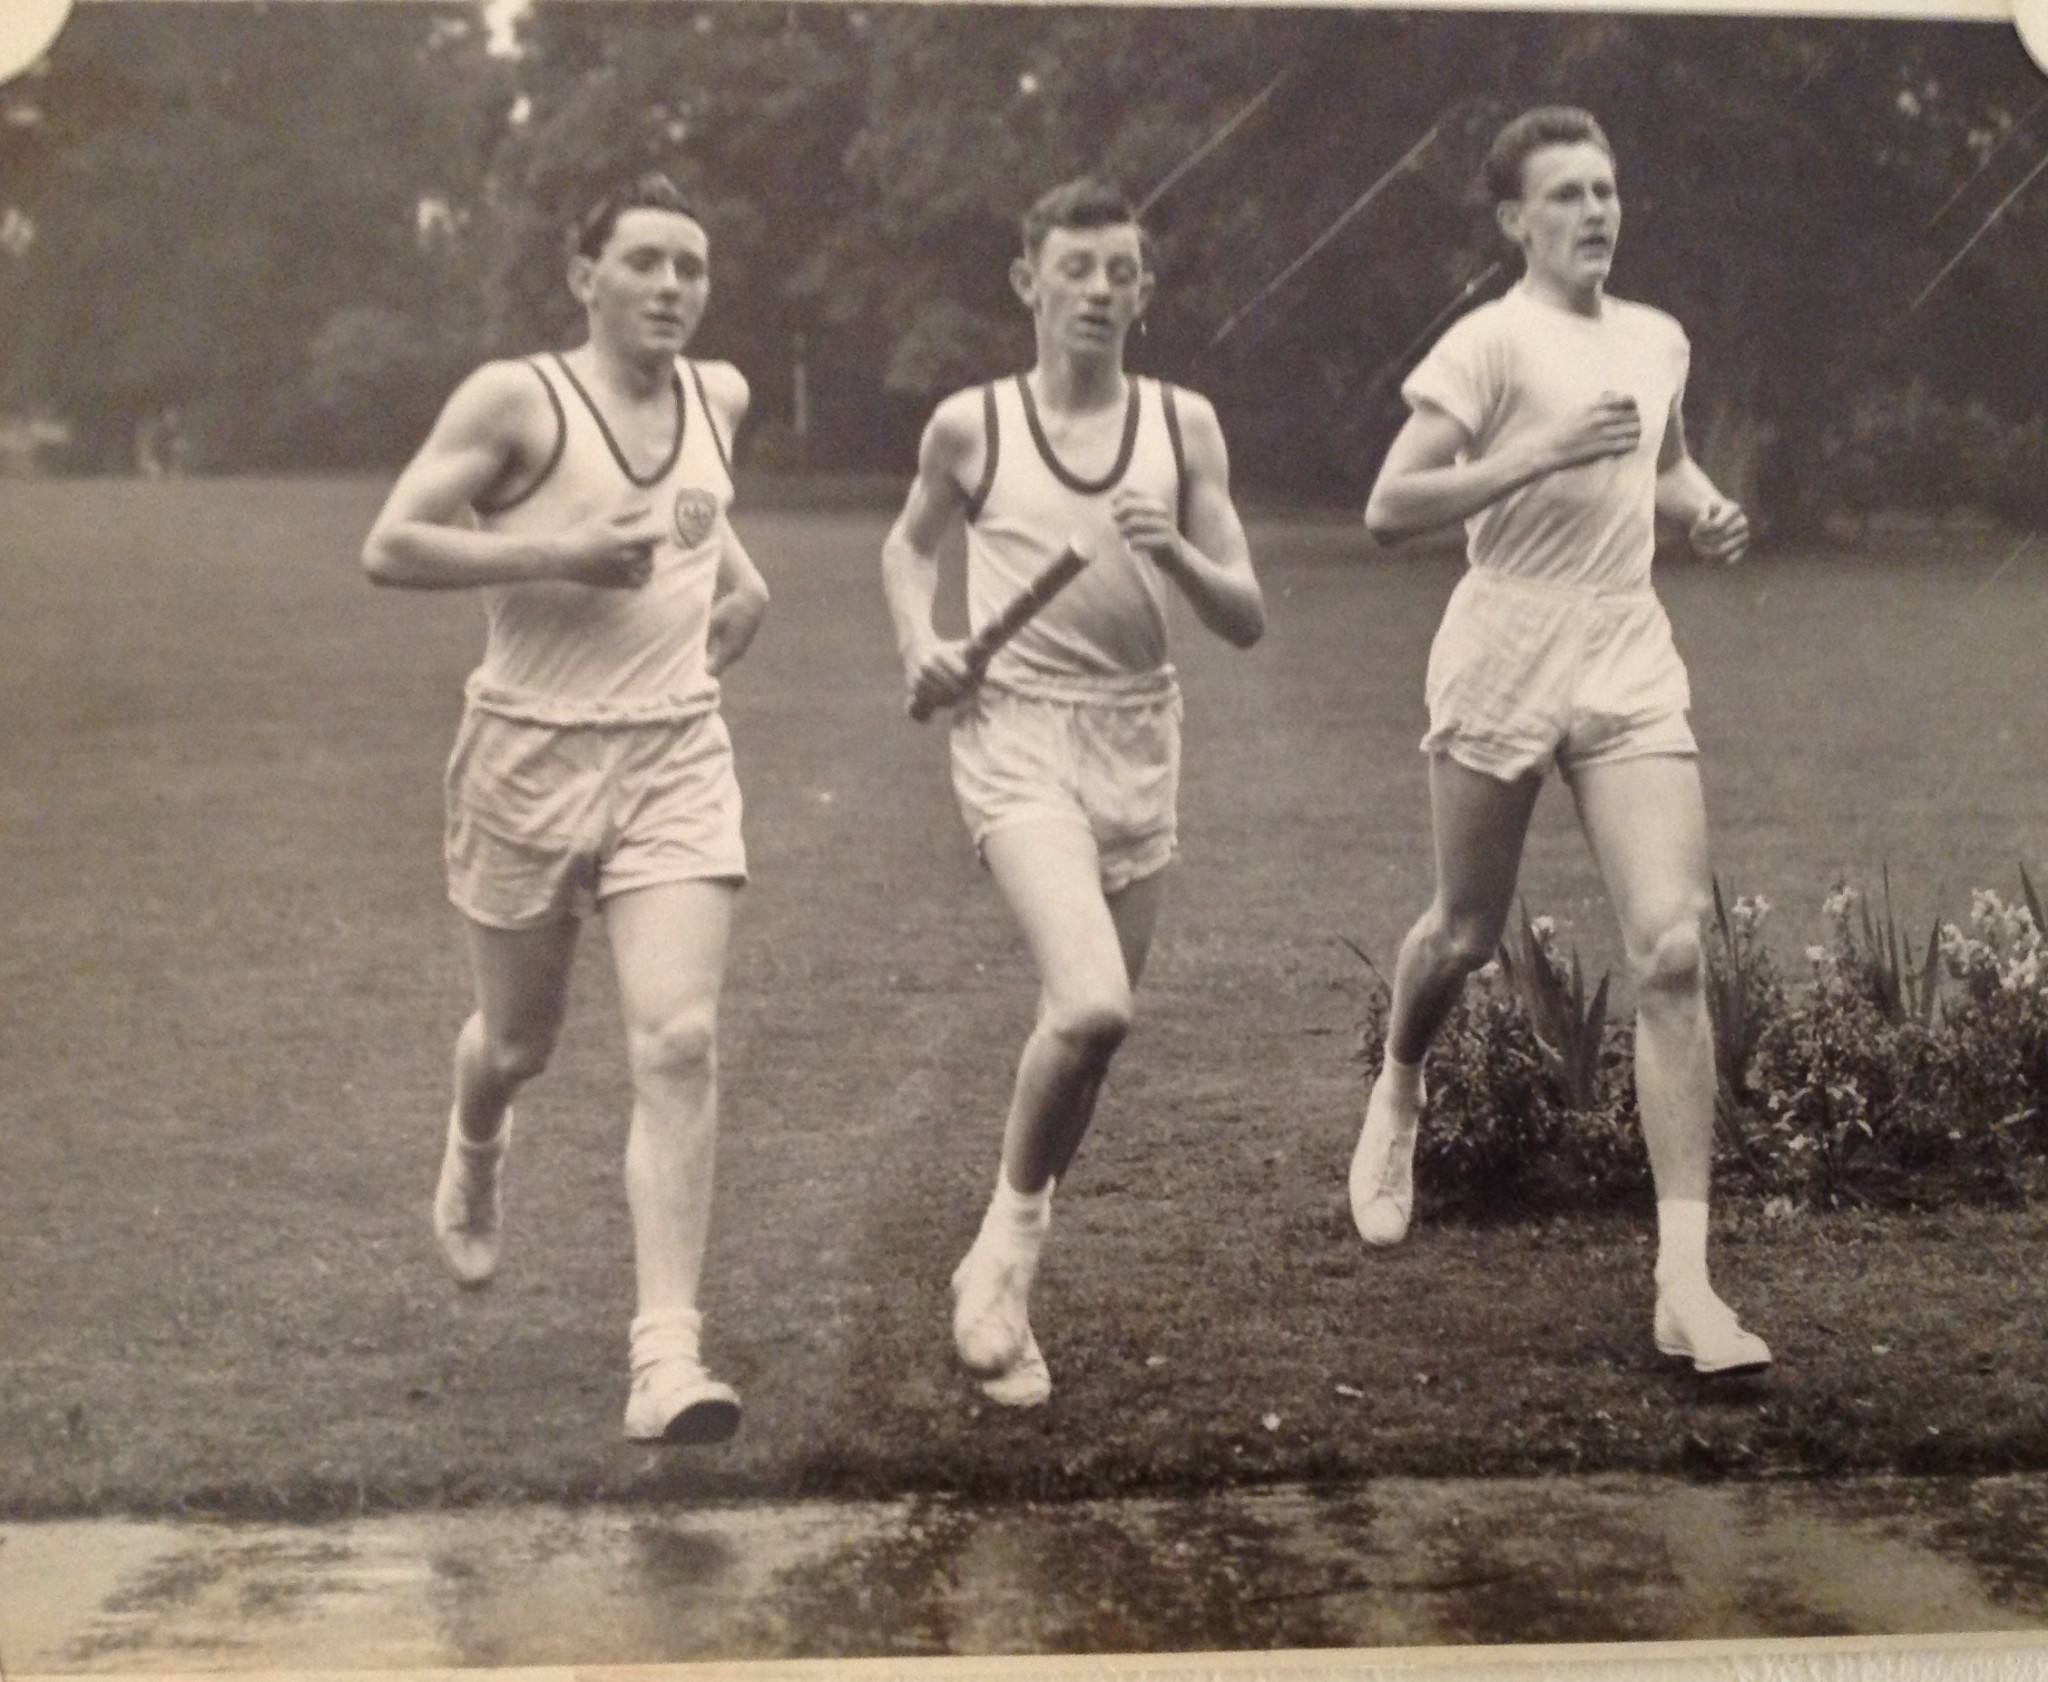 The 1958 Baton is carried by John Rogers, flanked by John Baker and David Jones ©John Rogers